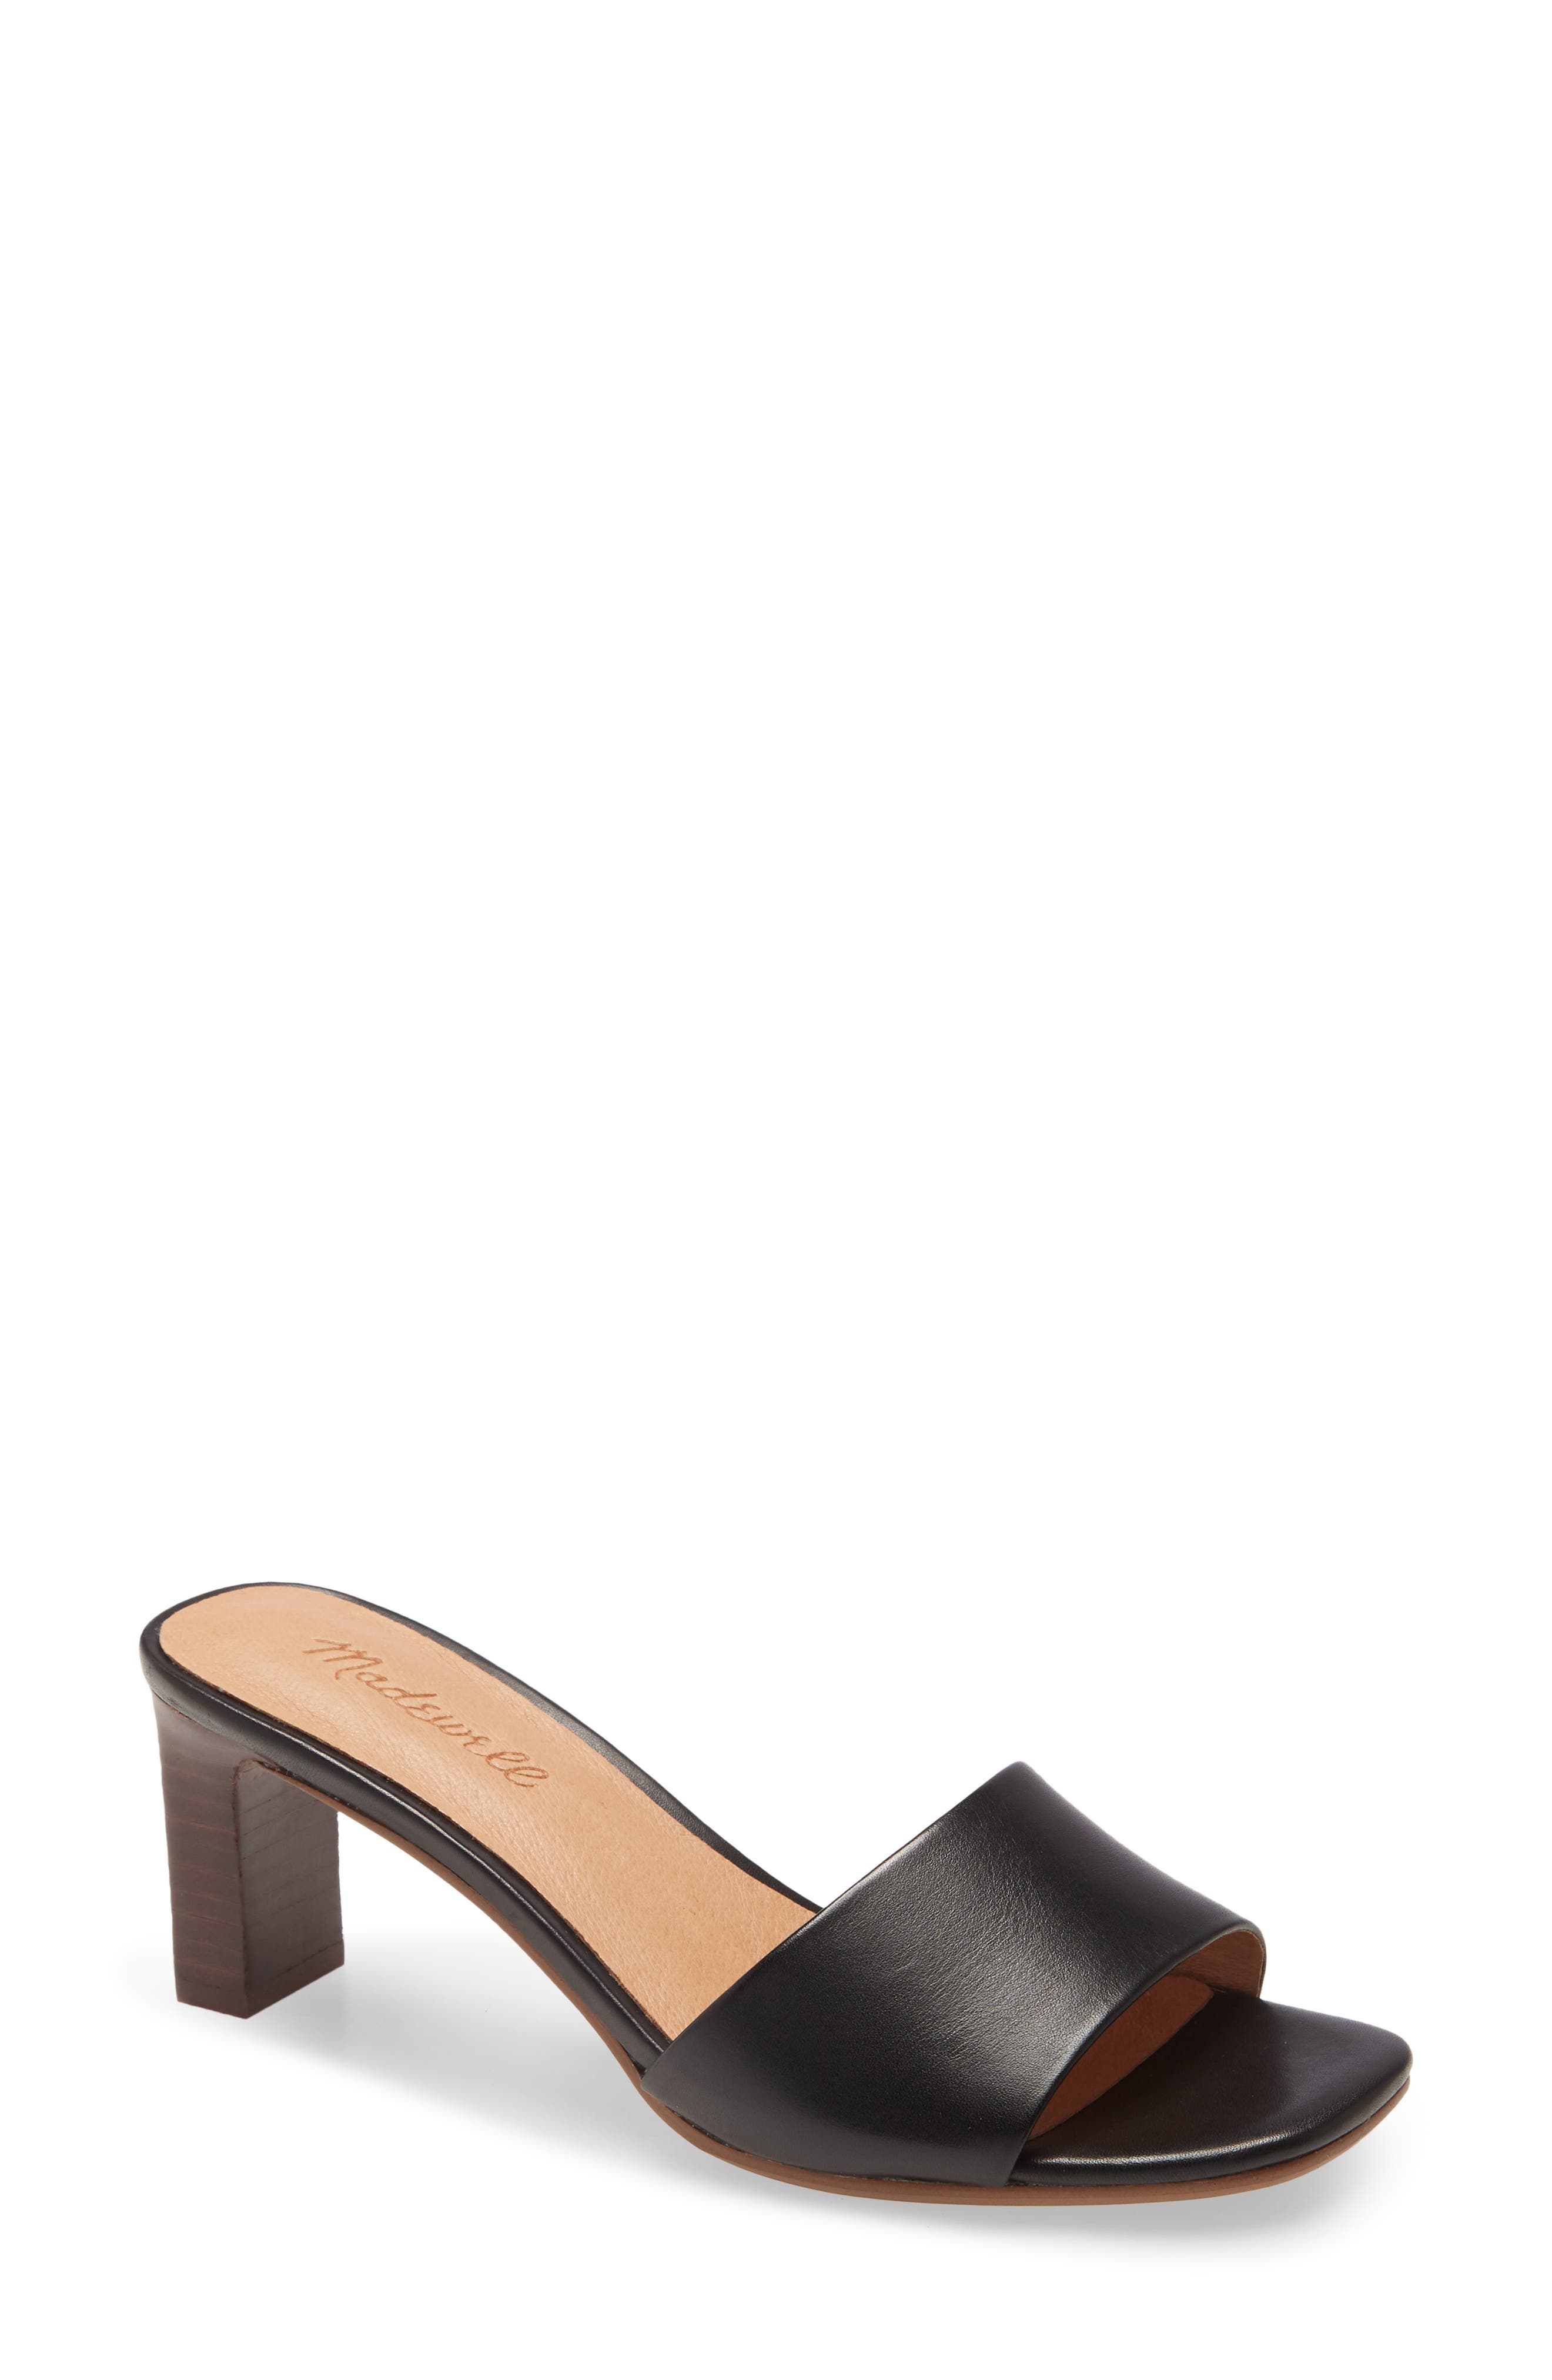 madewell shoes nordstrom